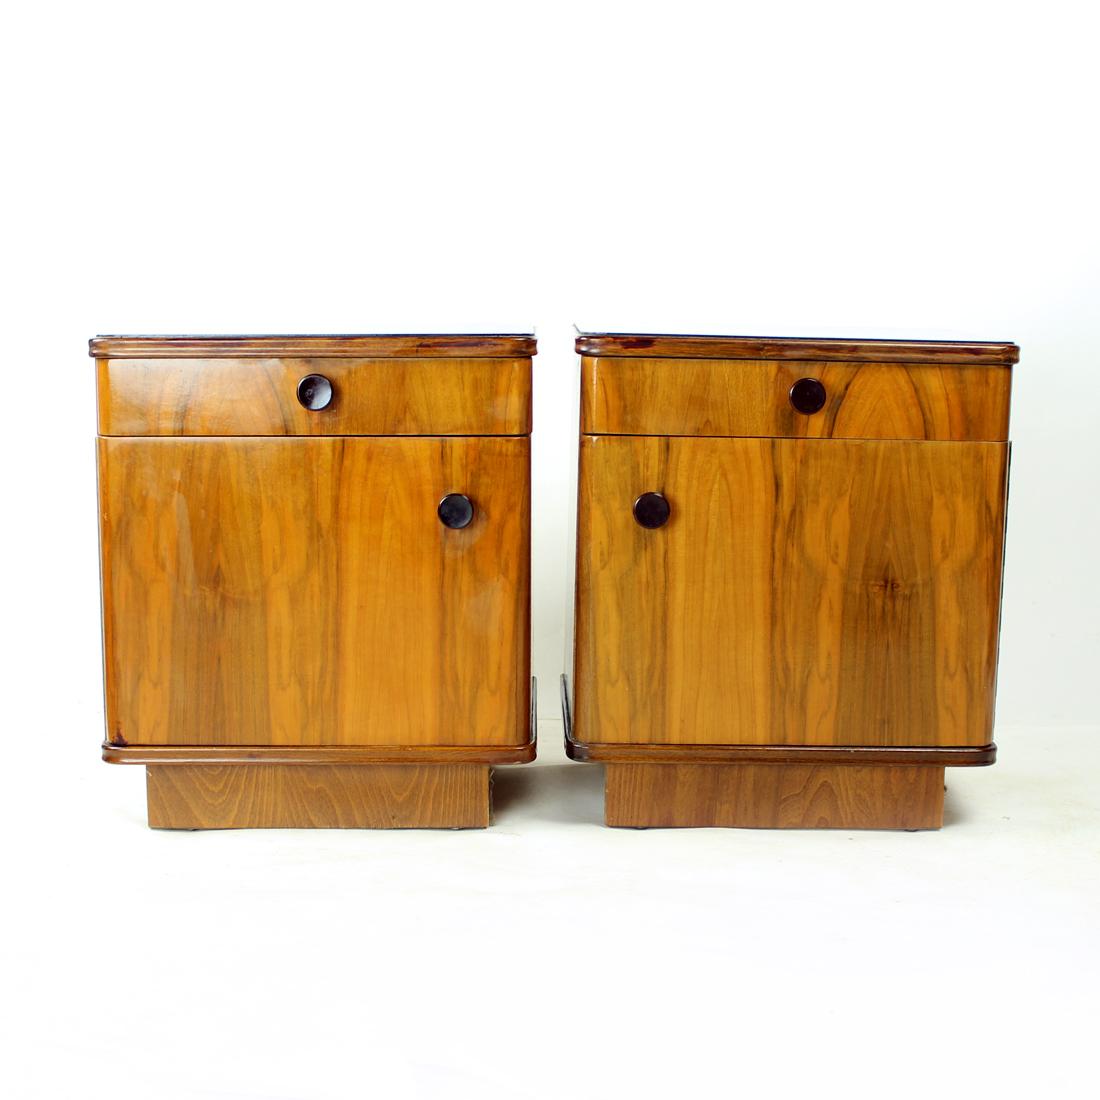 Beautiful set of two bedside tables from mid-century era. Produced in Czechoslovakia in 1950s. The set is made of oak construction with walnut veneer. And what a veneer it is! Beautiful structure and colors of the wood. The top board is in black